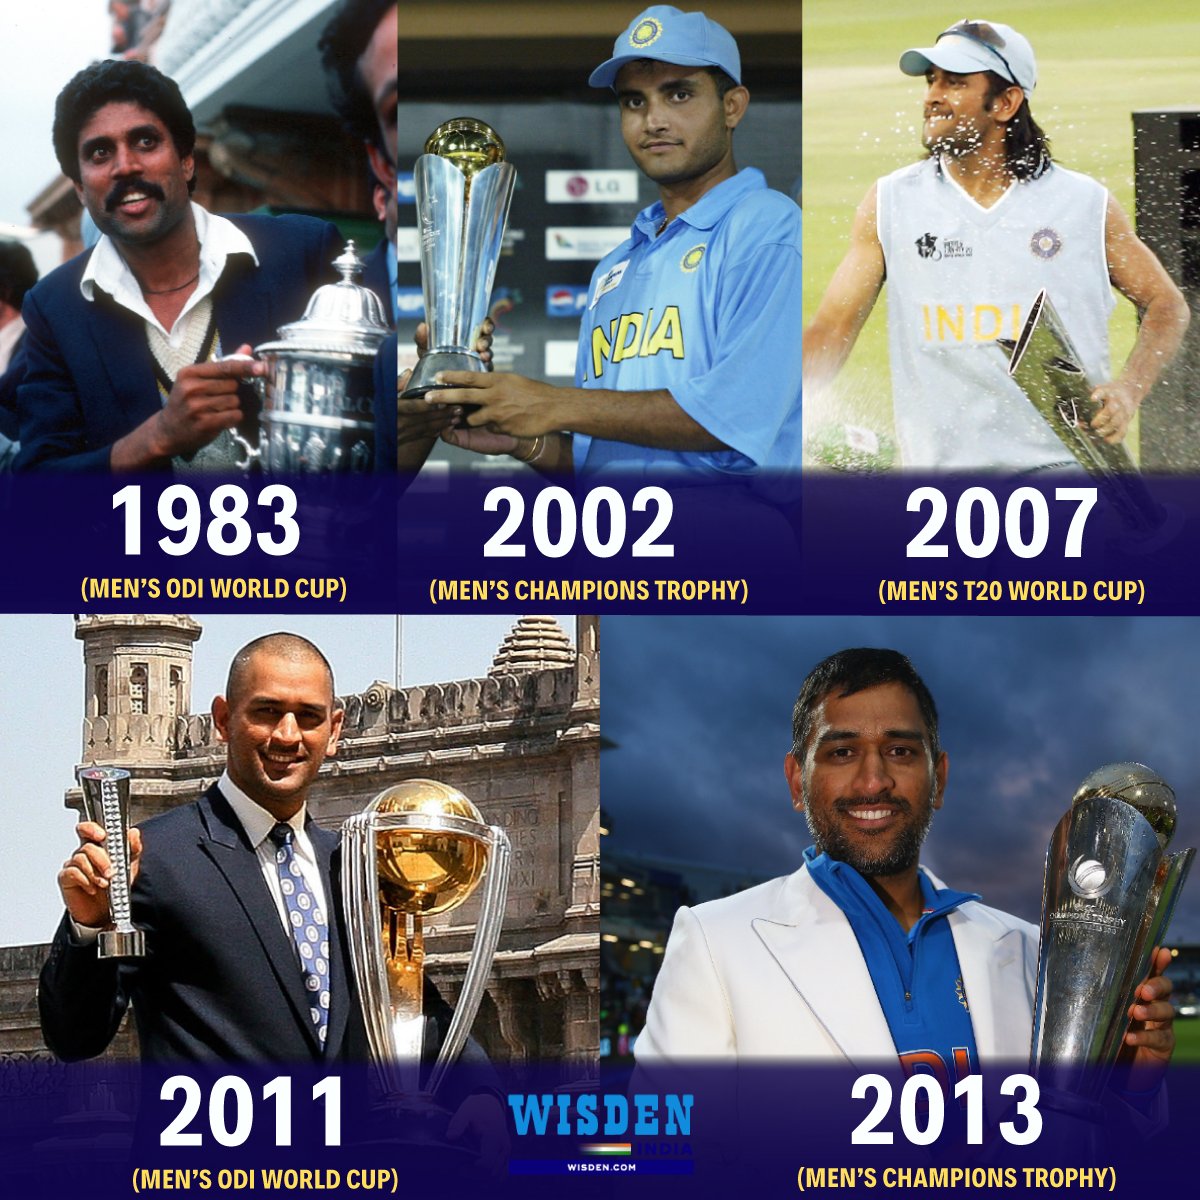 1983 ODI World Cup ✅
2002 Champions Trophy ✅
2007 T20 World Cup✅
2011 ODI World Cup ✅
2013 Champions Trophy ✅

India have won 5 ICC trophies, three of which were under MS Dhoni's captaincy.

#MSDhoni #India #INDvsAUS #WTCFinal #RohitSharma #KapilDev #SouravGanguly #Cricket